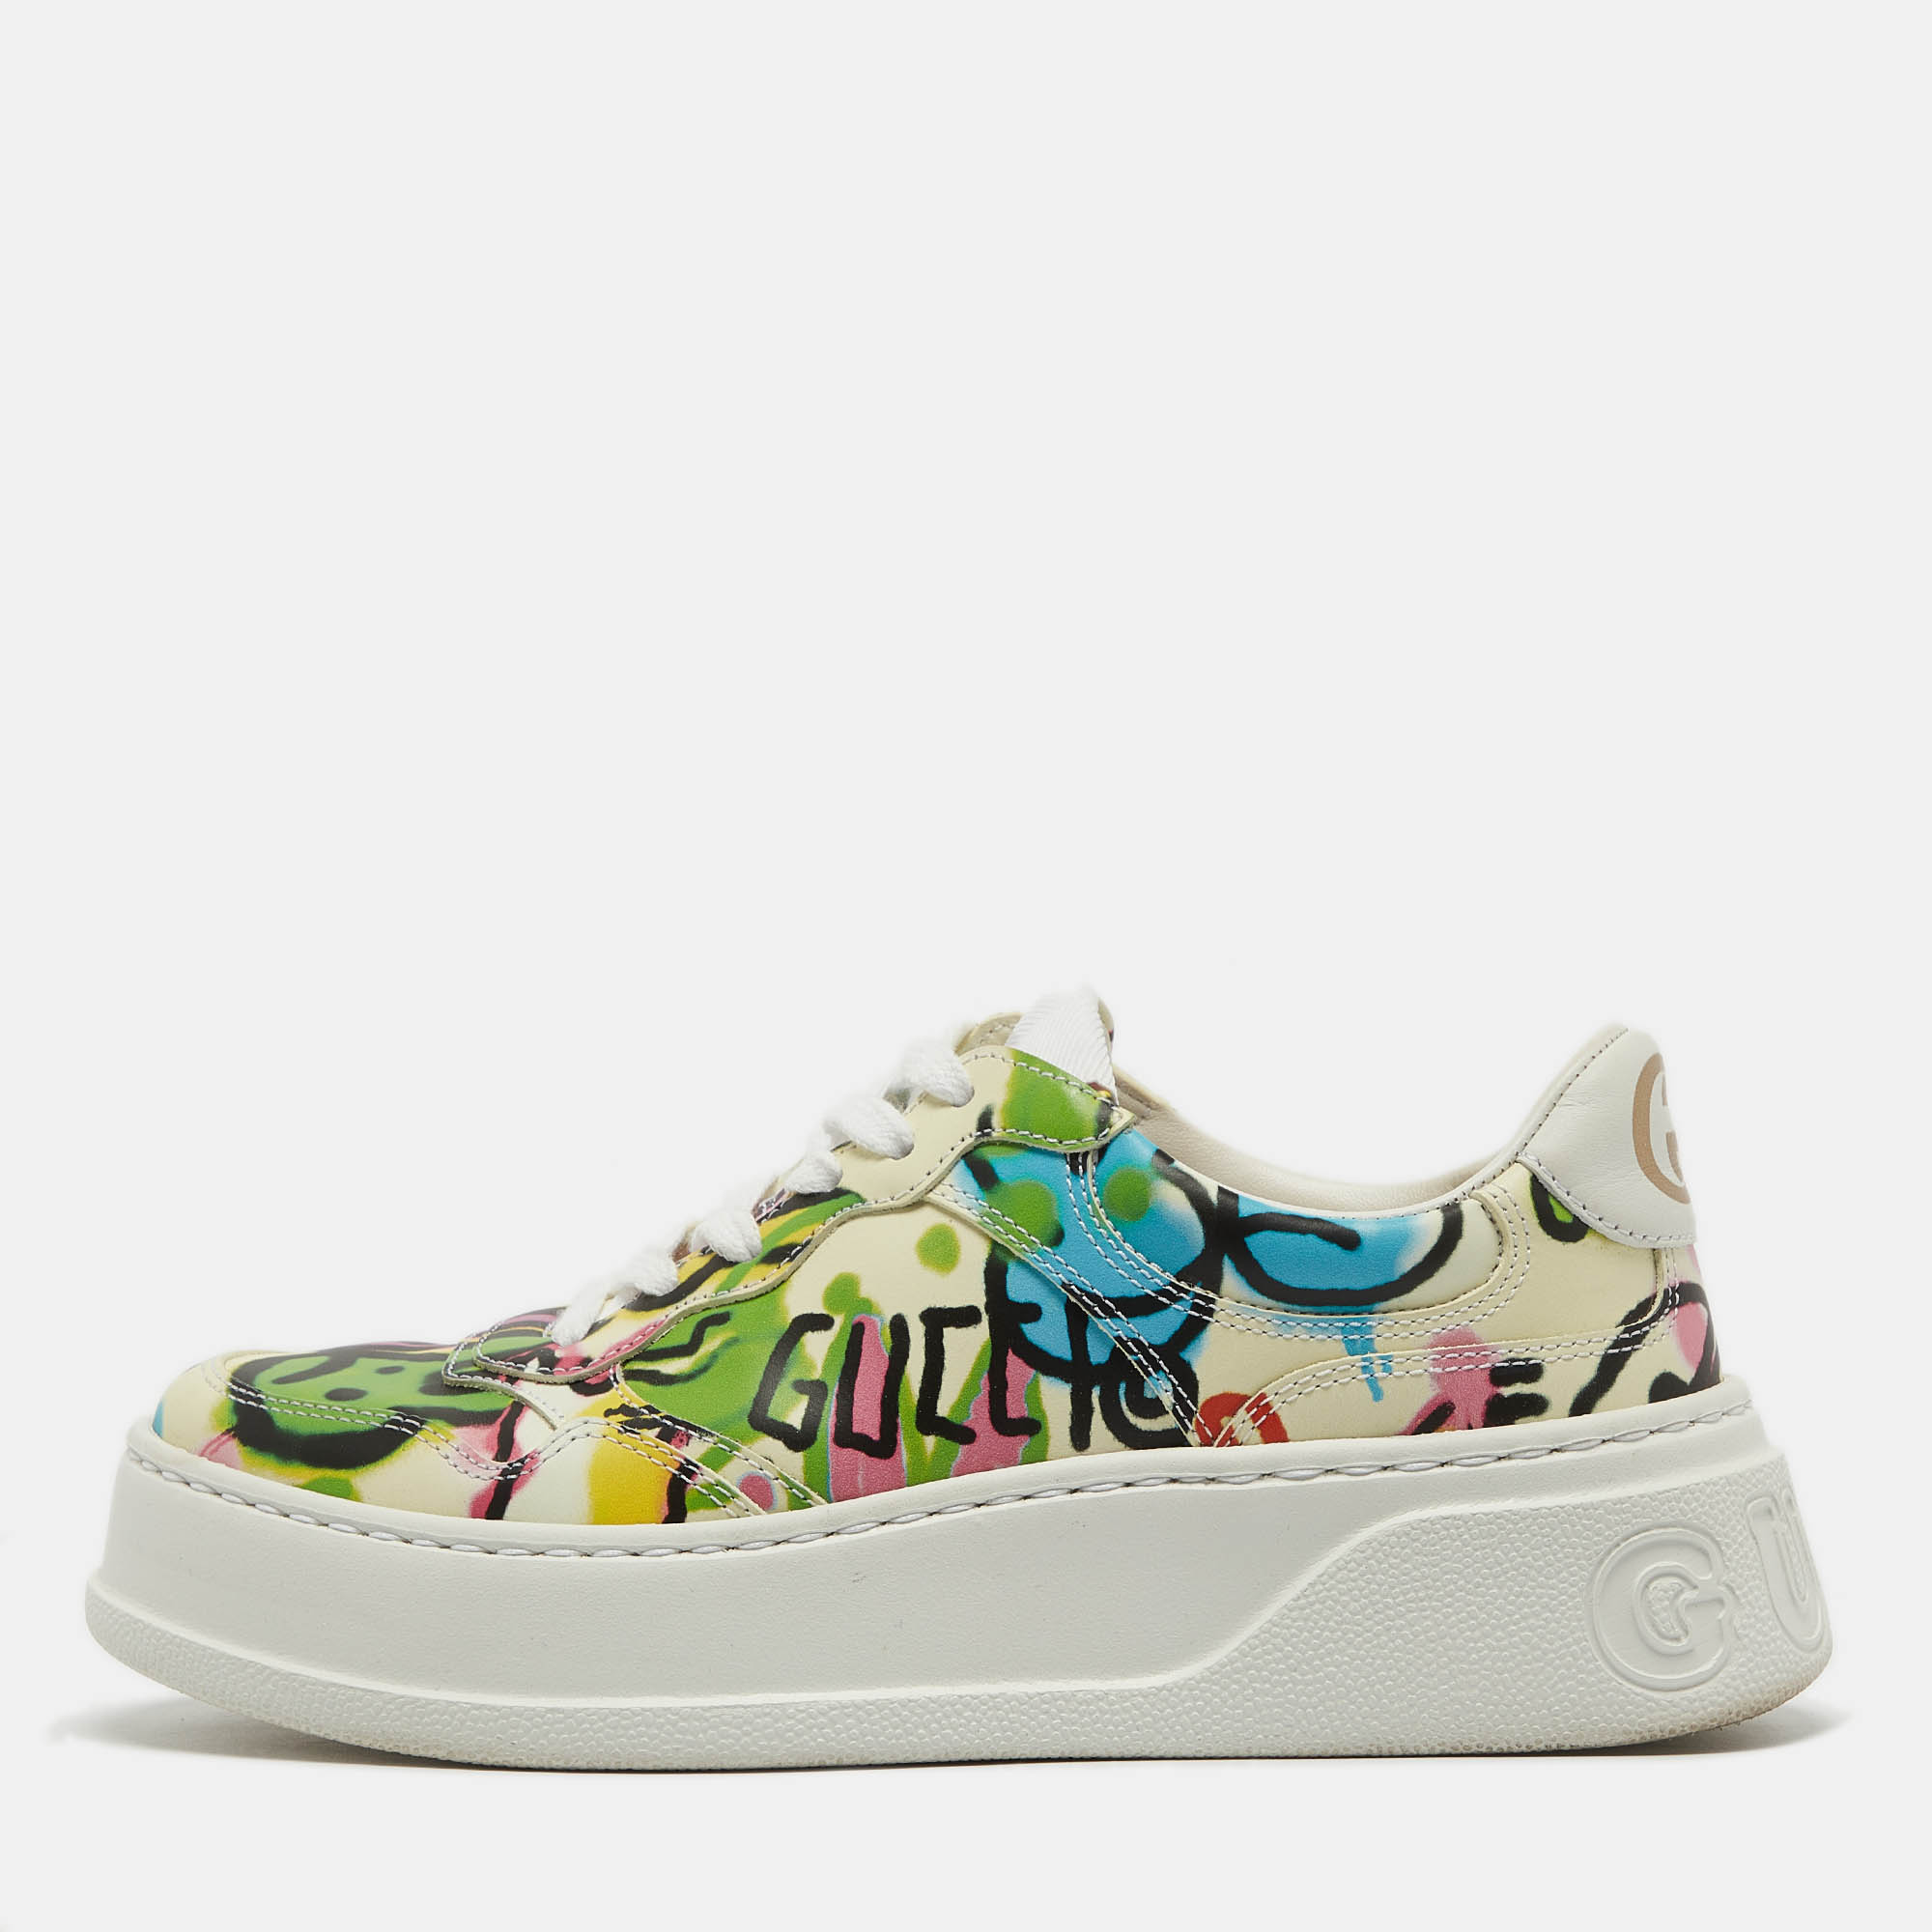 Gucci multicolor printed leather platform sneakers size 36